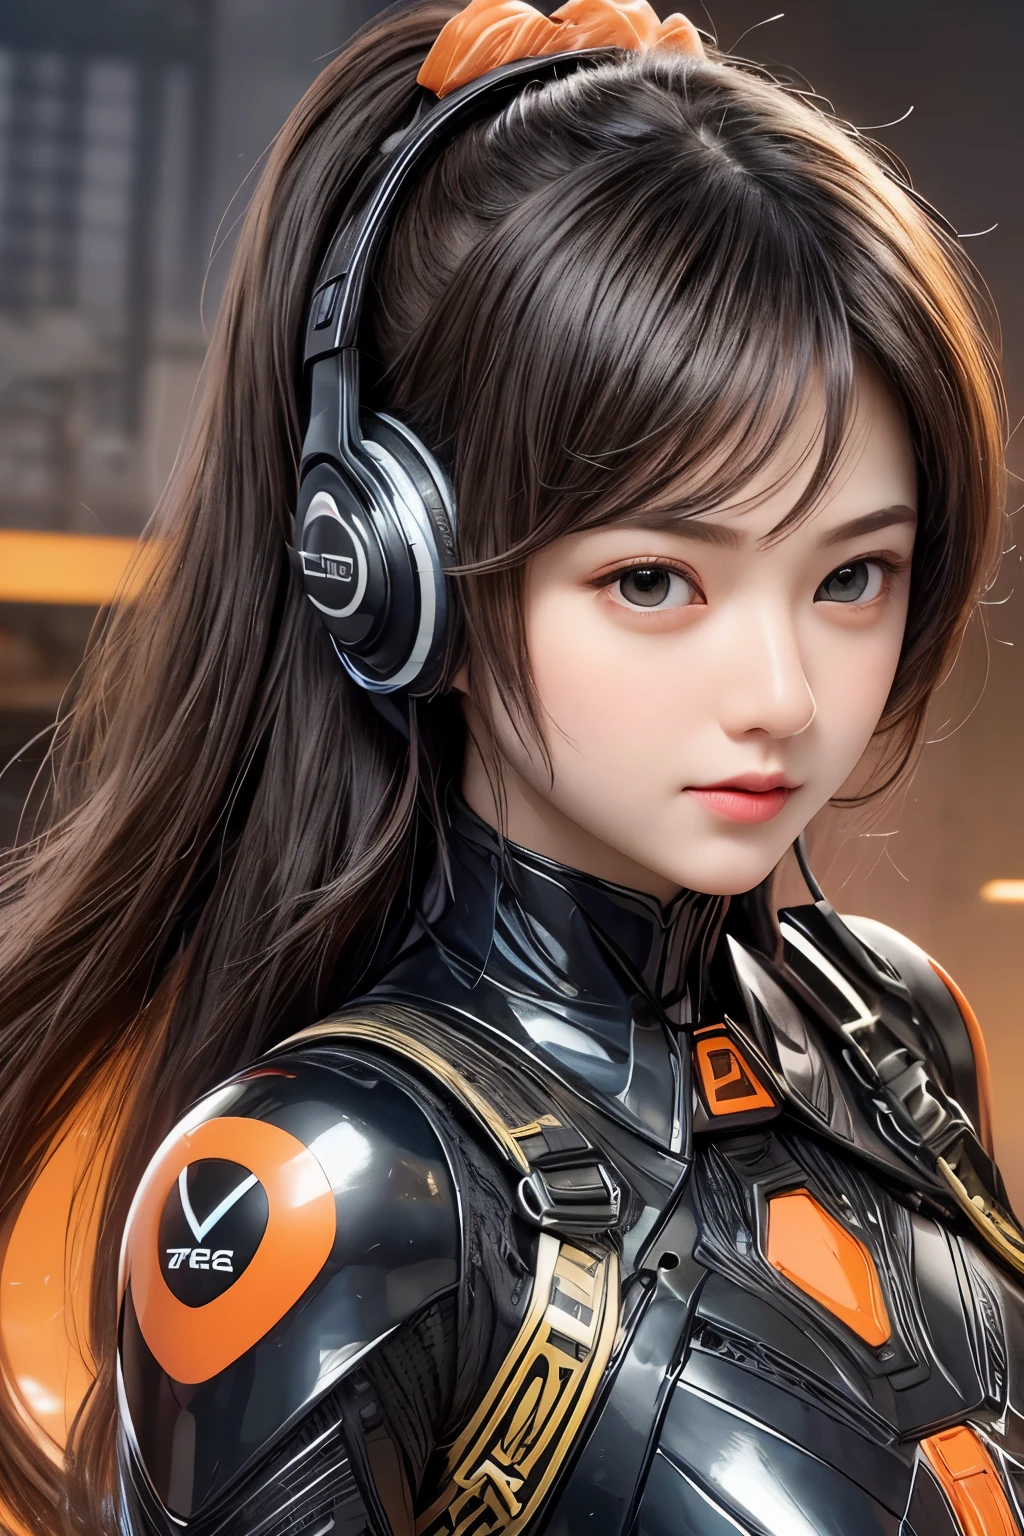 Top Quality, Masterpiece, Ultra High Resolution, (Photorealistic: 1.4), Raw Photo, 1 Girl, Black Hair, Glossy Skin, 1 Mechanical Girl, (((Ultra Realistic Details)), Portrait, Global Illumination, Shadows, Octane Rendering, 8K, Ultra Sharp, Intricate Ornaments Details, Futuristic Gaming Headphone, nixie suga,  very intricate detail, realistic light, CGSoation trend, brown eyes, glowing eyes, facing the camera, matte black and glossy orange bodysuit, orange lining on suit, Long hair, Ponytail hair, Half body shot, holding a donut 